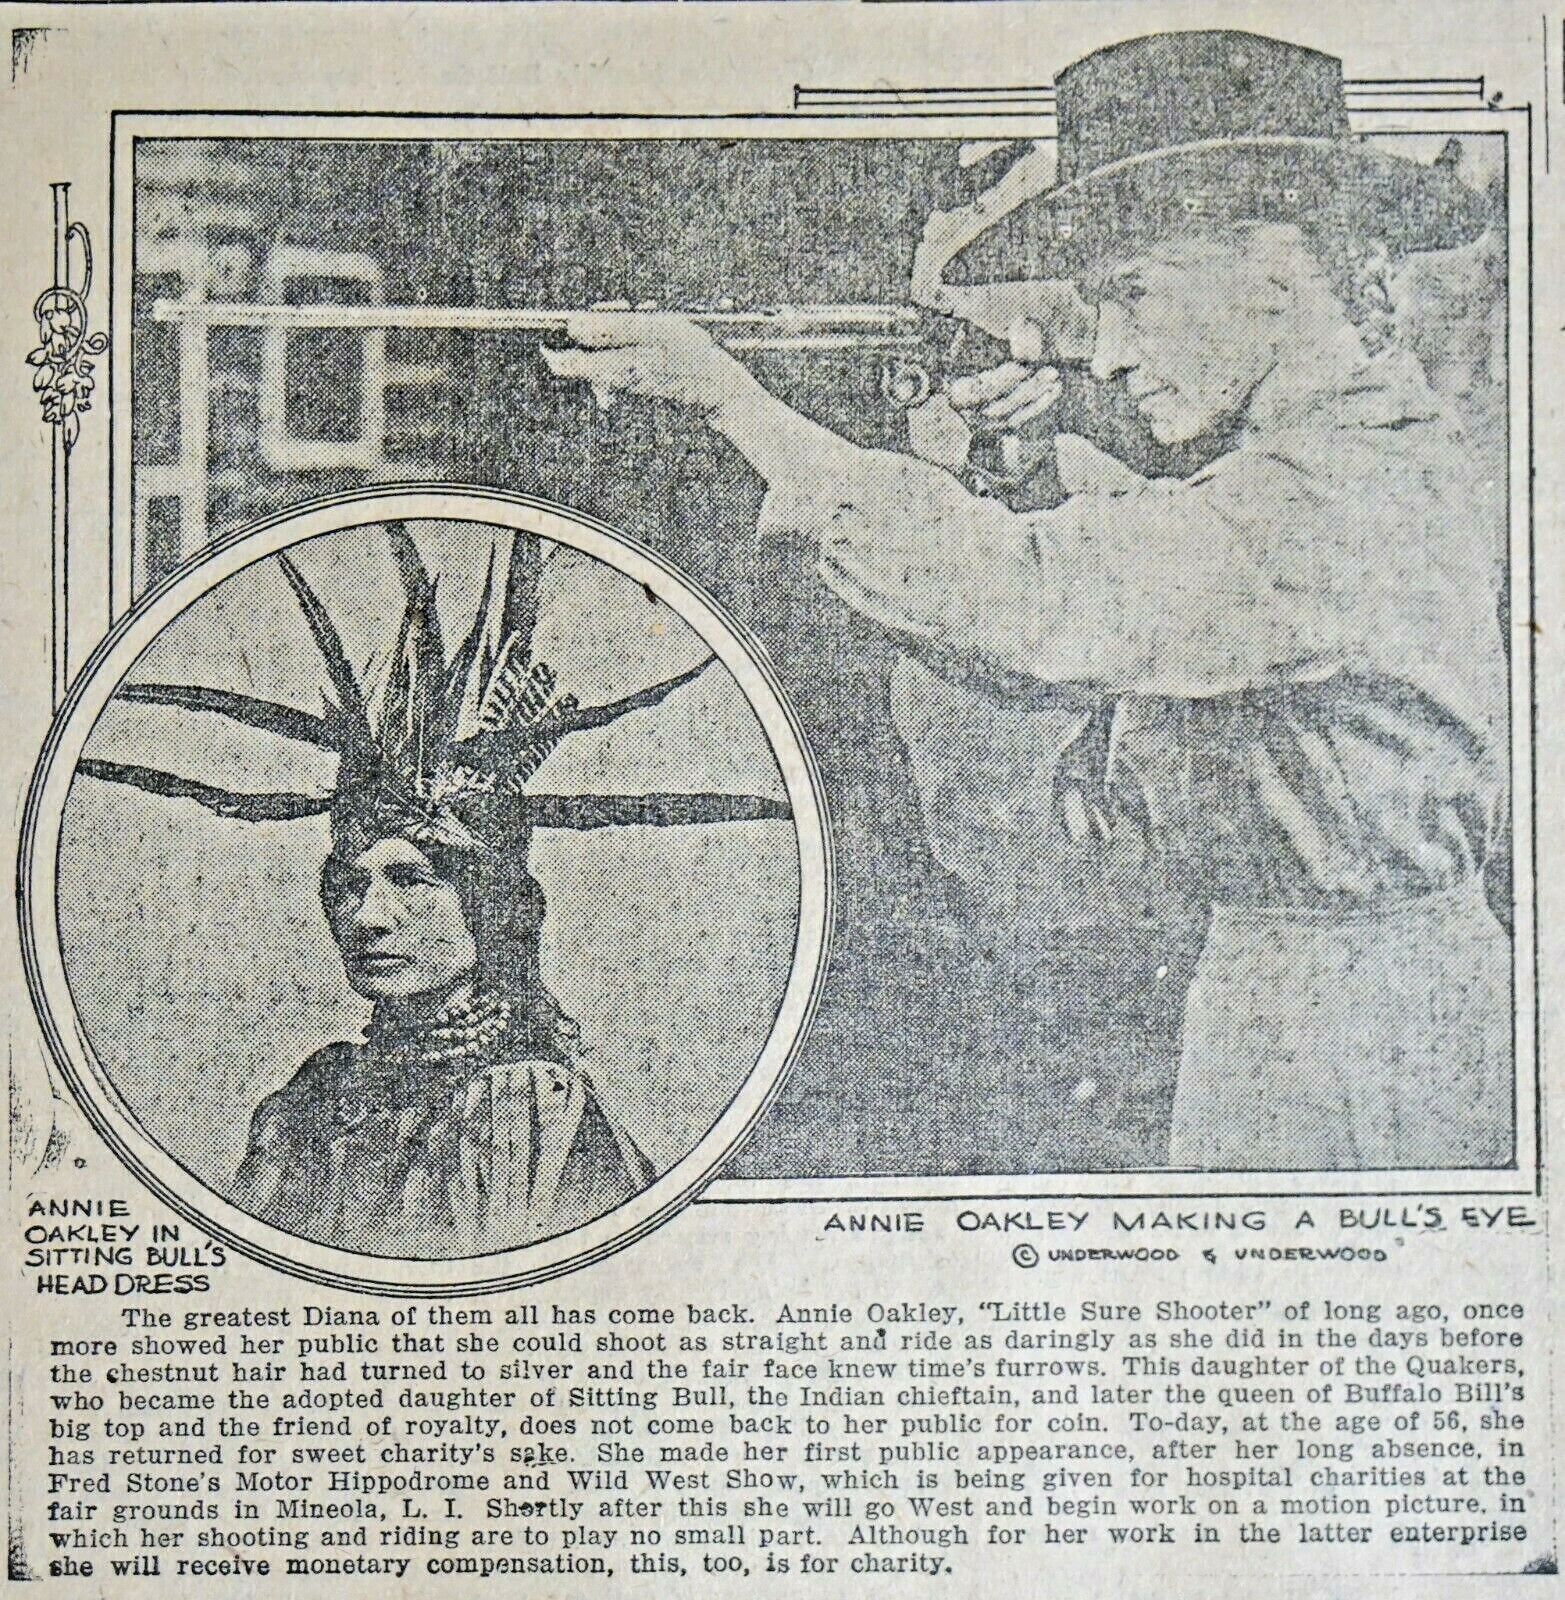 1922 Burlington Newspaper Page - 56 Year Old Annie Oakley Shoots For Charity